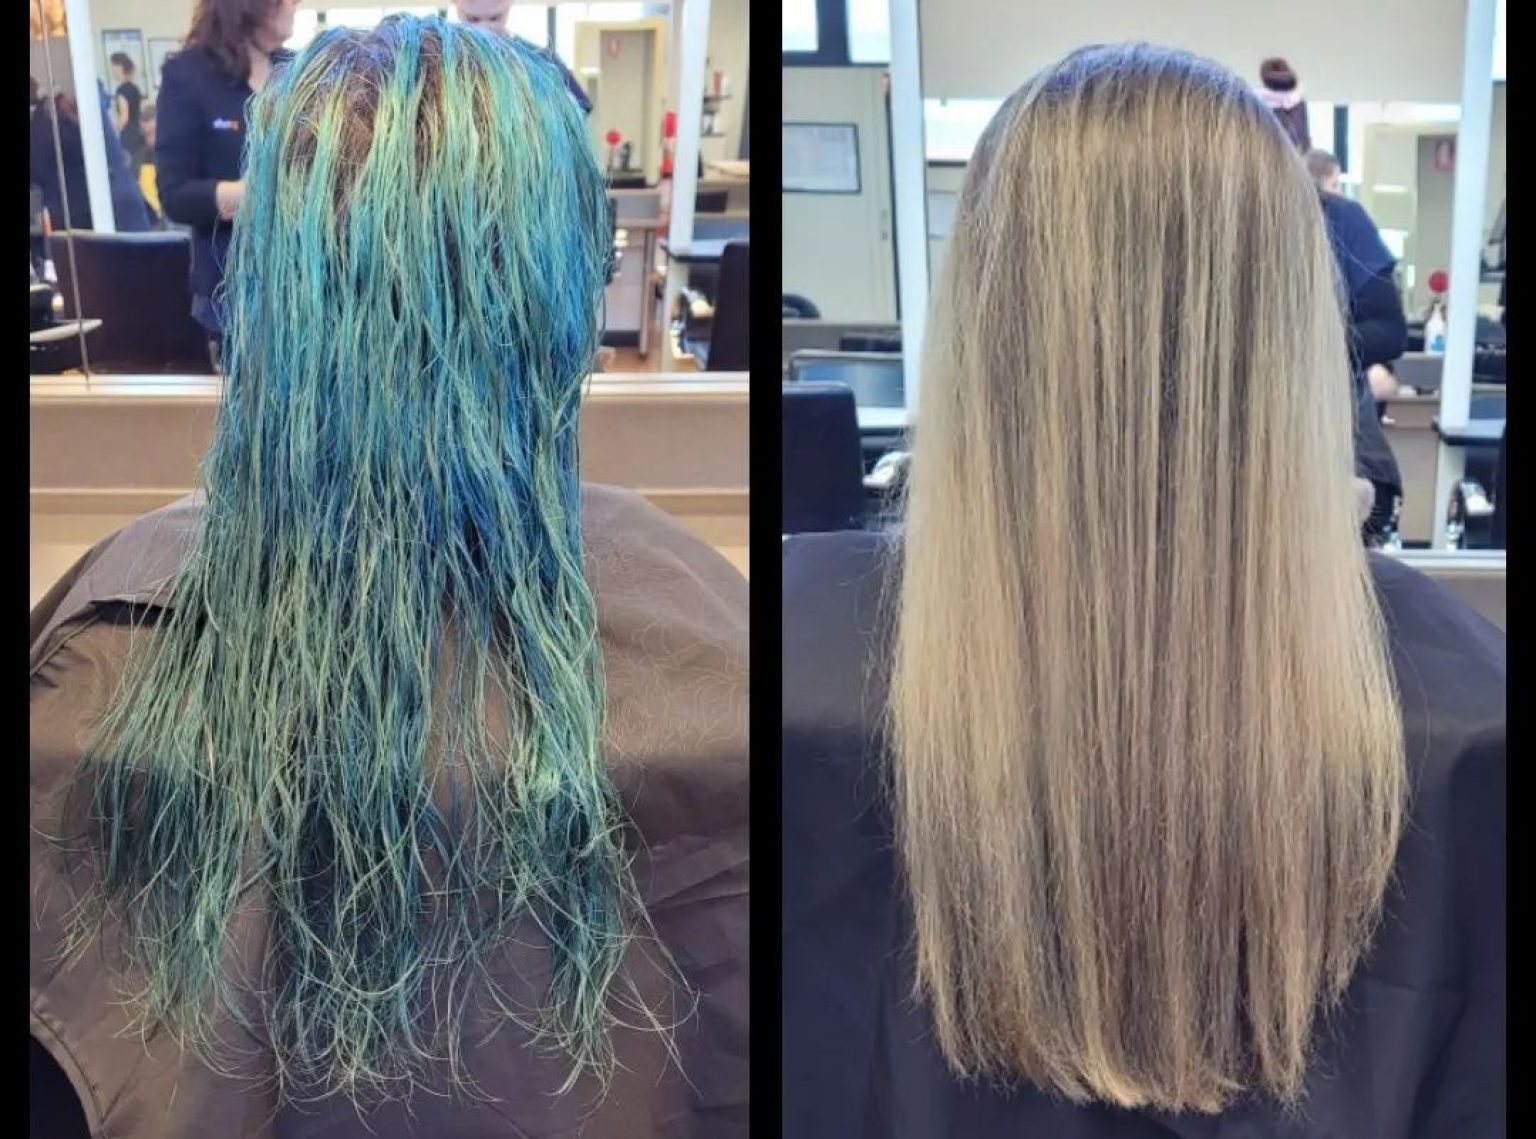 2. How to Remove Blue Hair Dye - wide 4